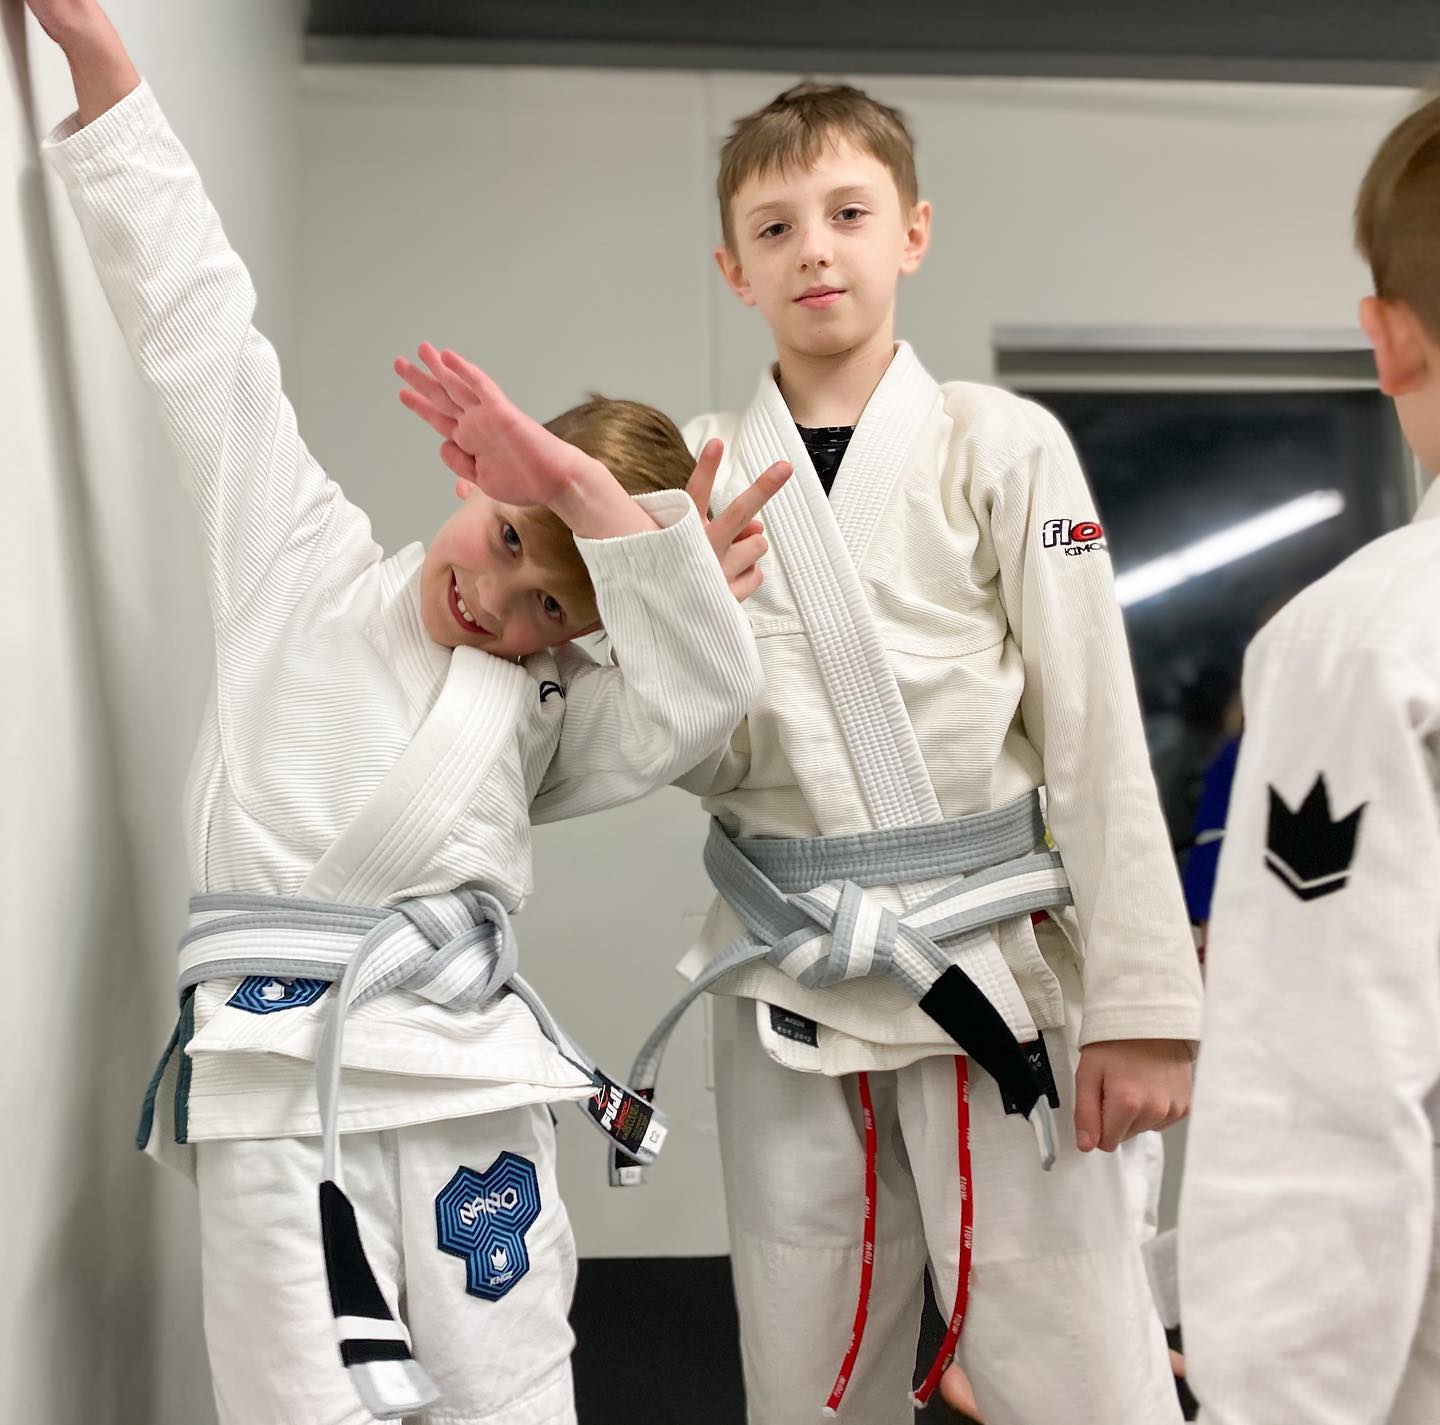 Yes, and no. Technically, there are no black belts in the kids belt system, so no, as a child they can not get a black belt, but we do hope that they will continue their training, and one day get their black belt. There are only 5 belts in BJJ: white, blue, purple, brown, and black. ... Children cannot graduate from the kid's belt system into adult belts until they are 15. Assuming they have attained the highest children's rank (green/black belt), they receive a blue belt on their 16th birthday or thereabouts.